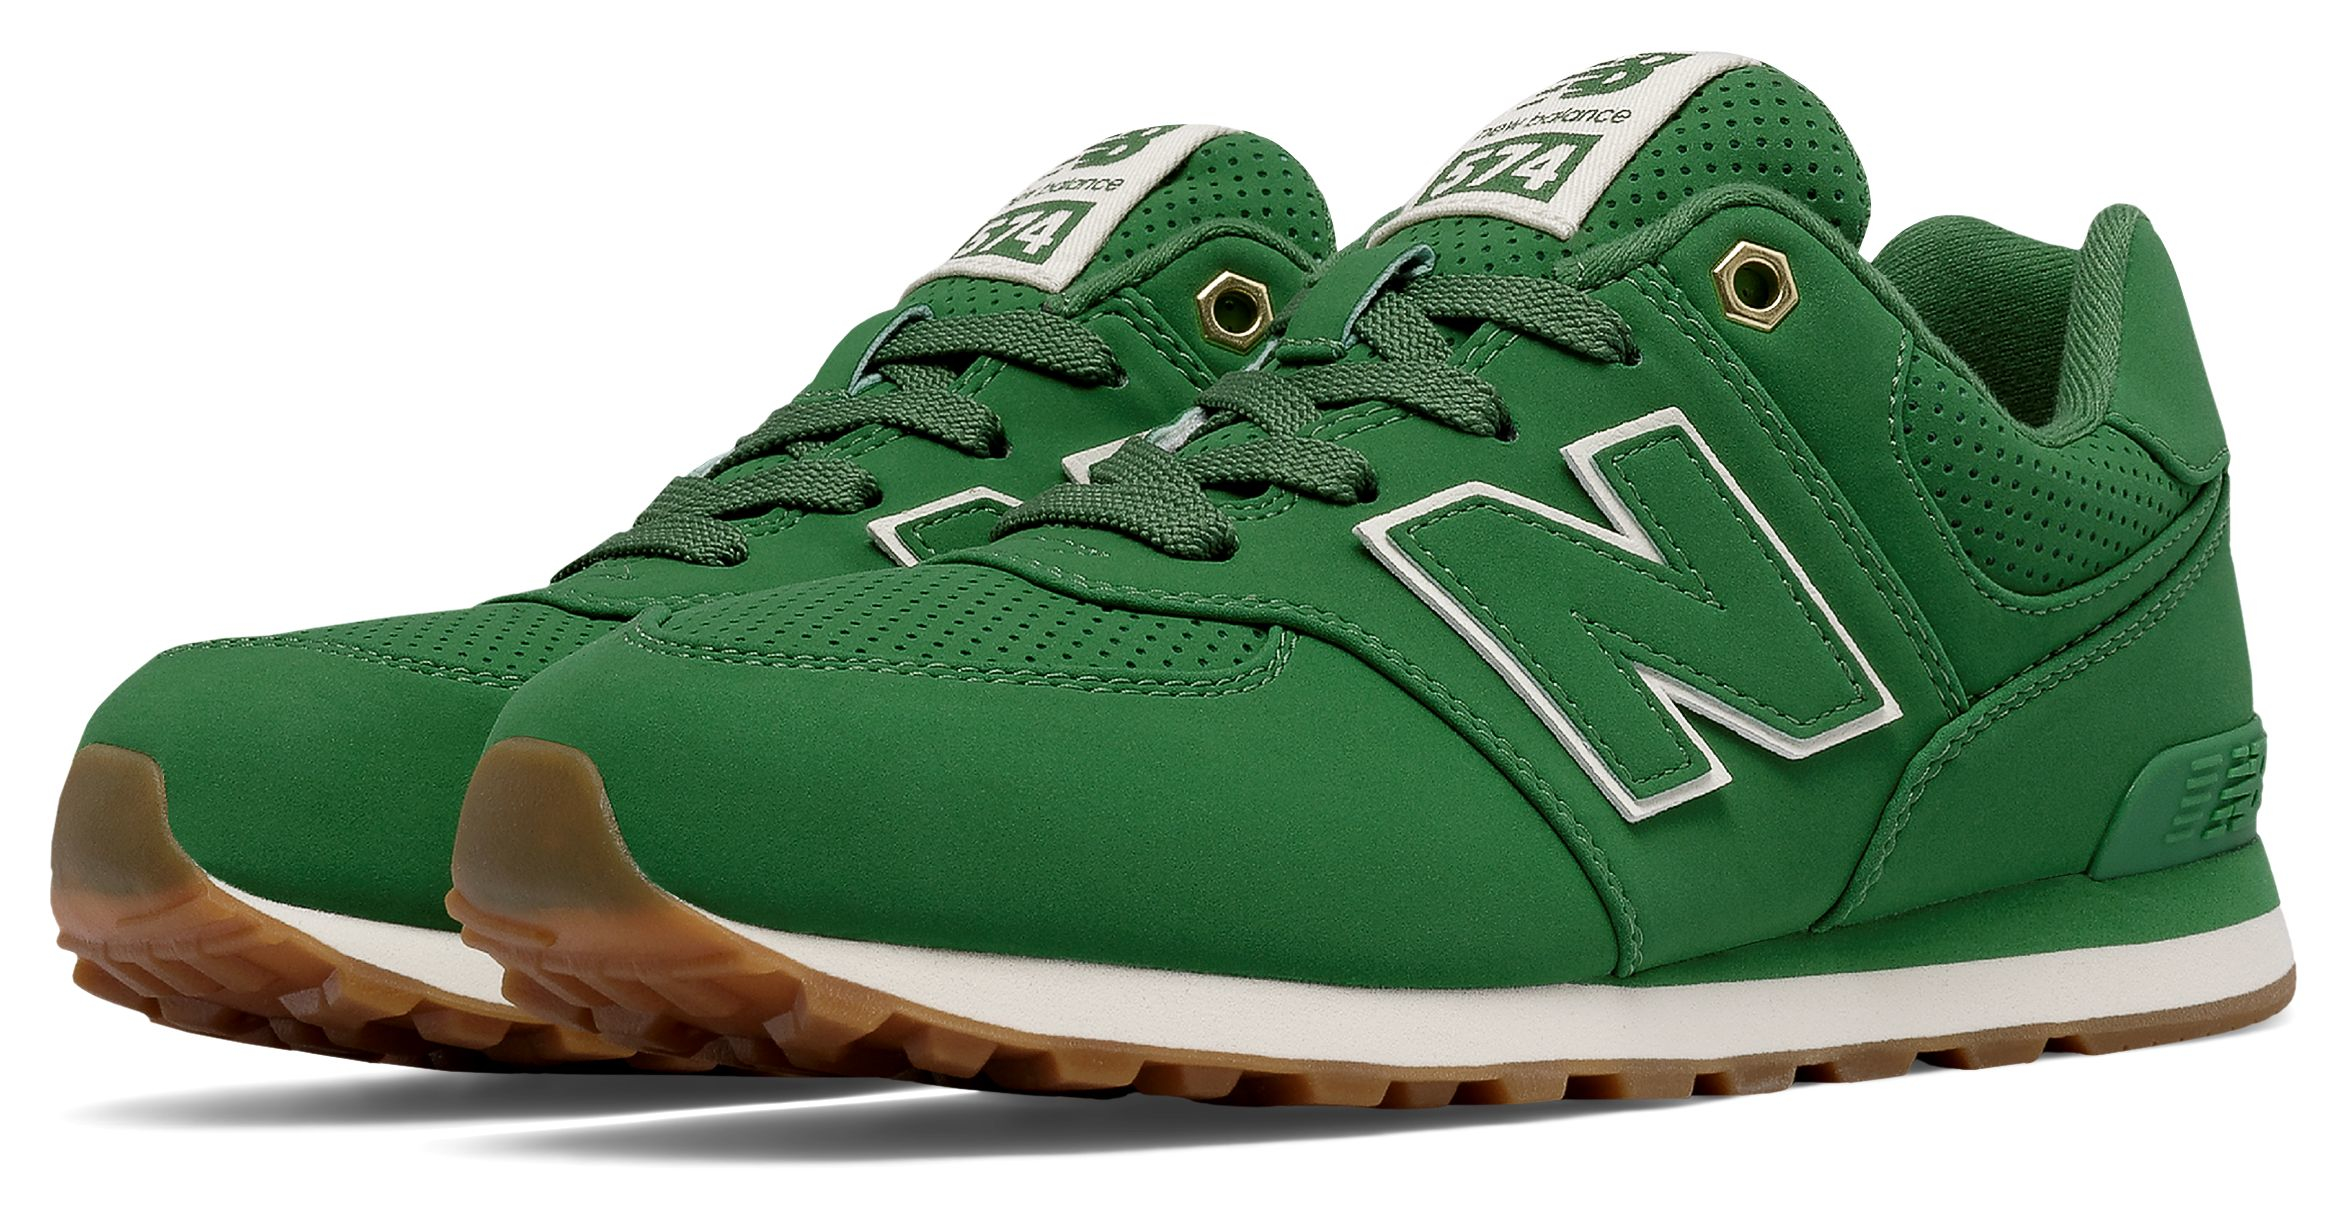 New Balance Synthetic 574 Heritage Sport 574 Heritage Sport in Green ...